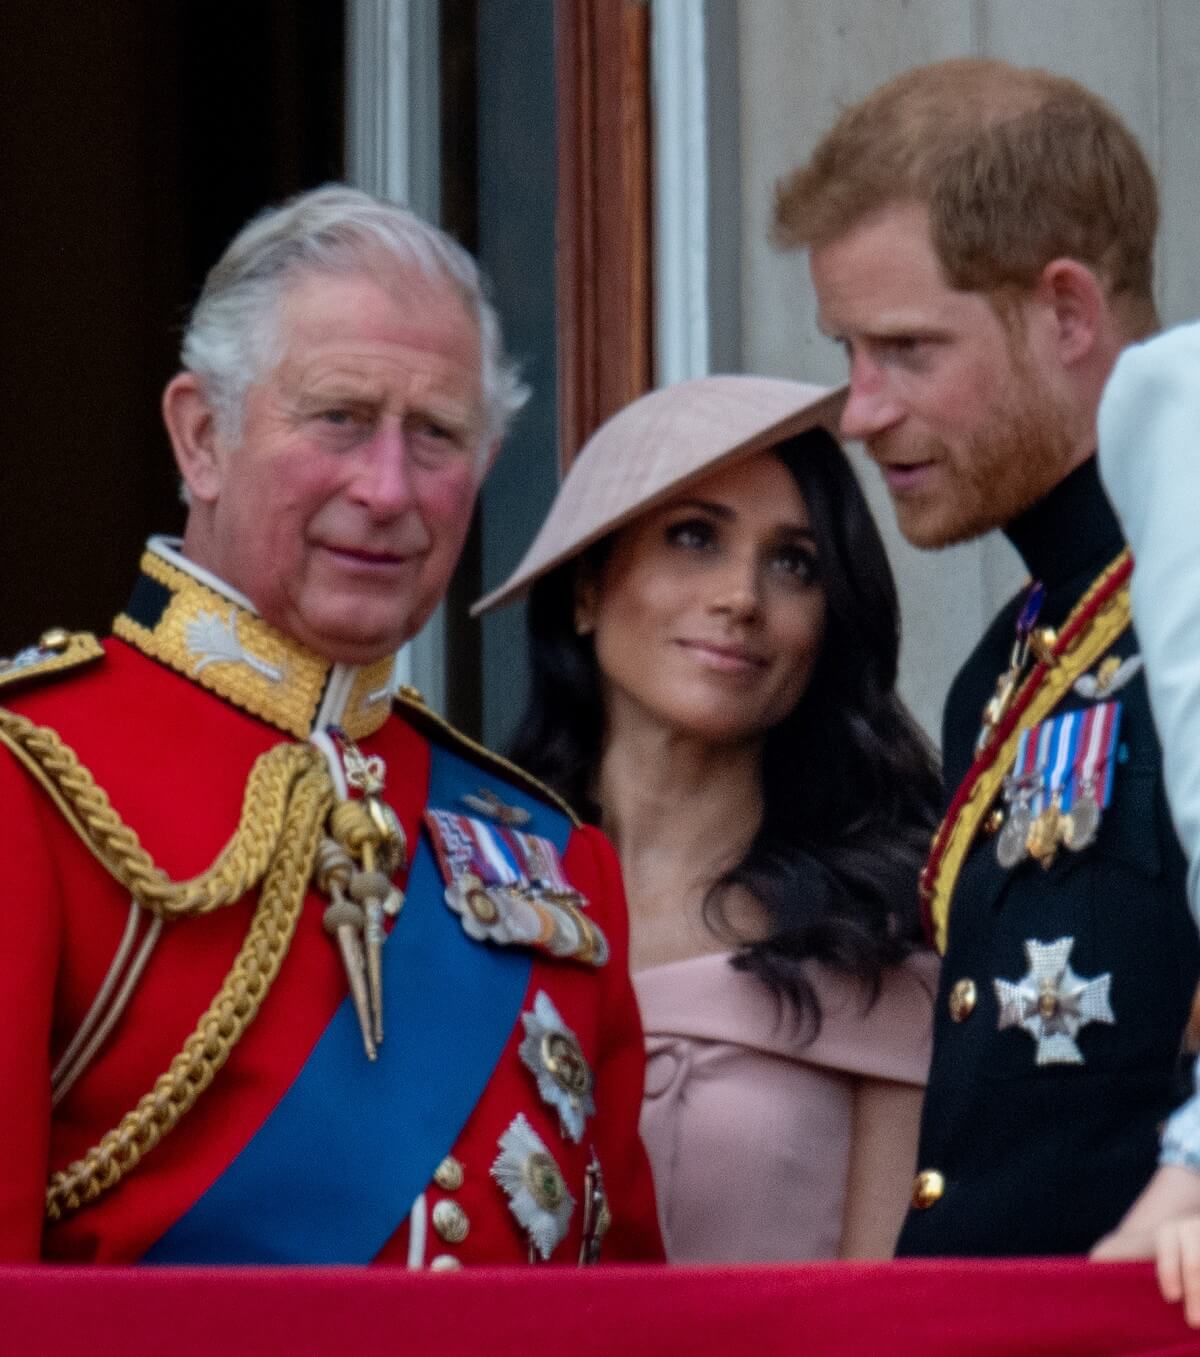 King Charles, Meghan Markle, and Prince Harry during Trooping The Colour 2018